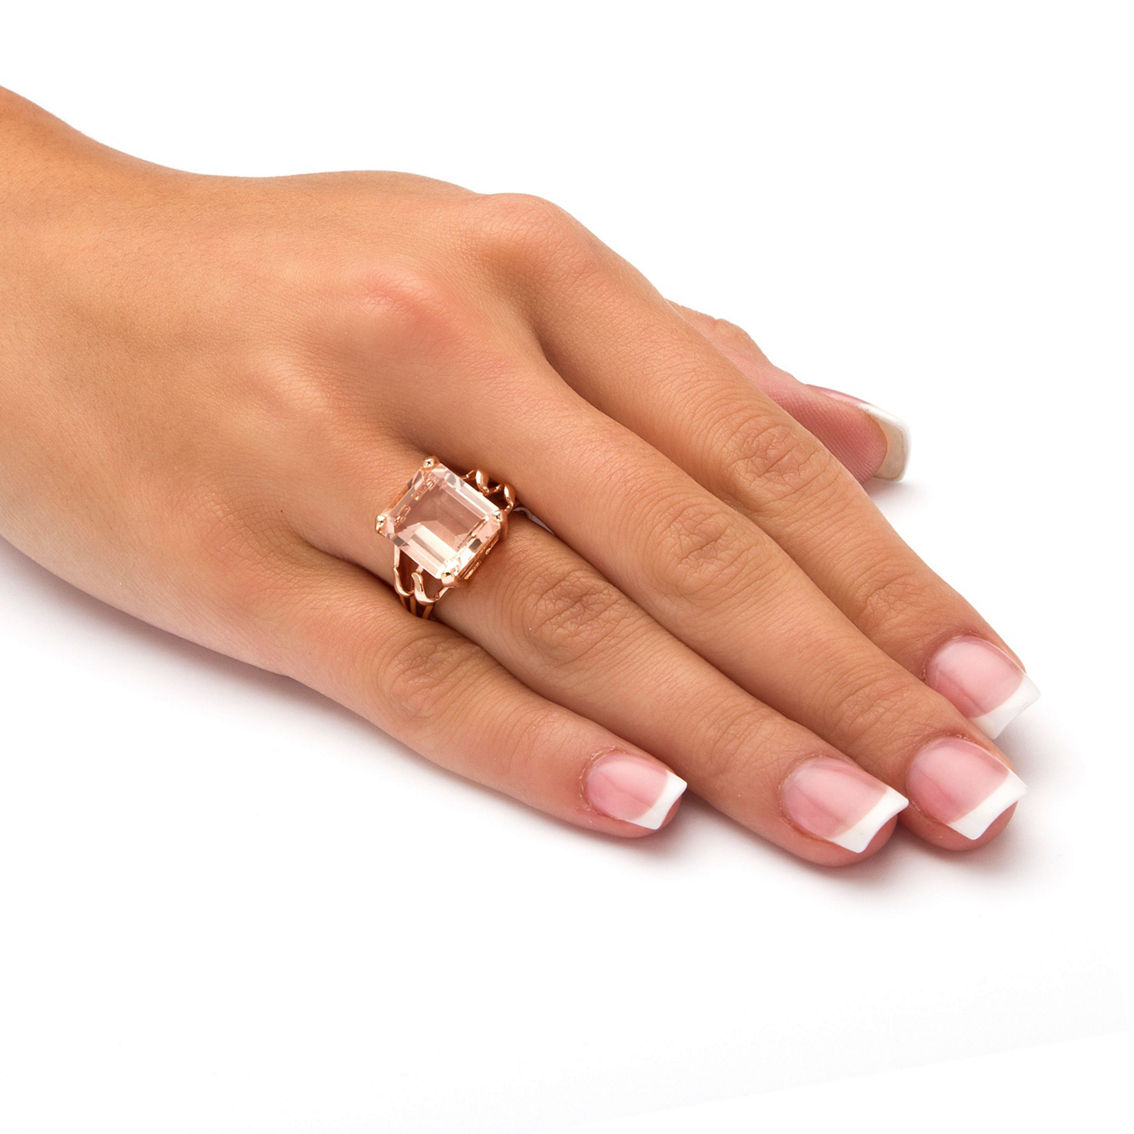 PalmBeach Emerald-Cut Simulated Morganite Ring in Rose Gold-Plated Silver - Image 3 of 5